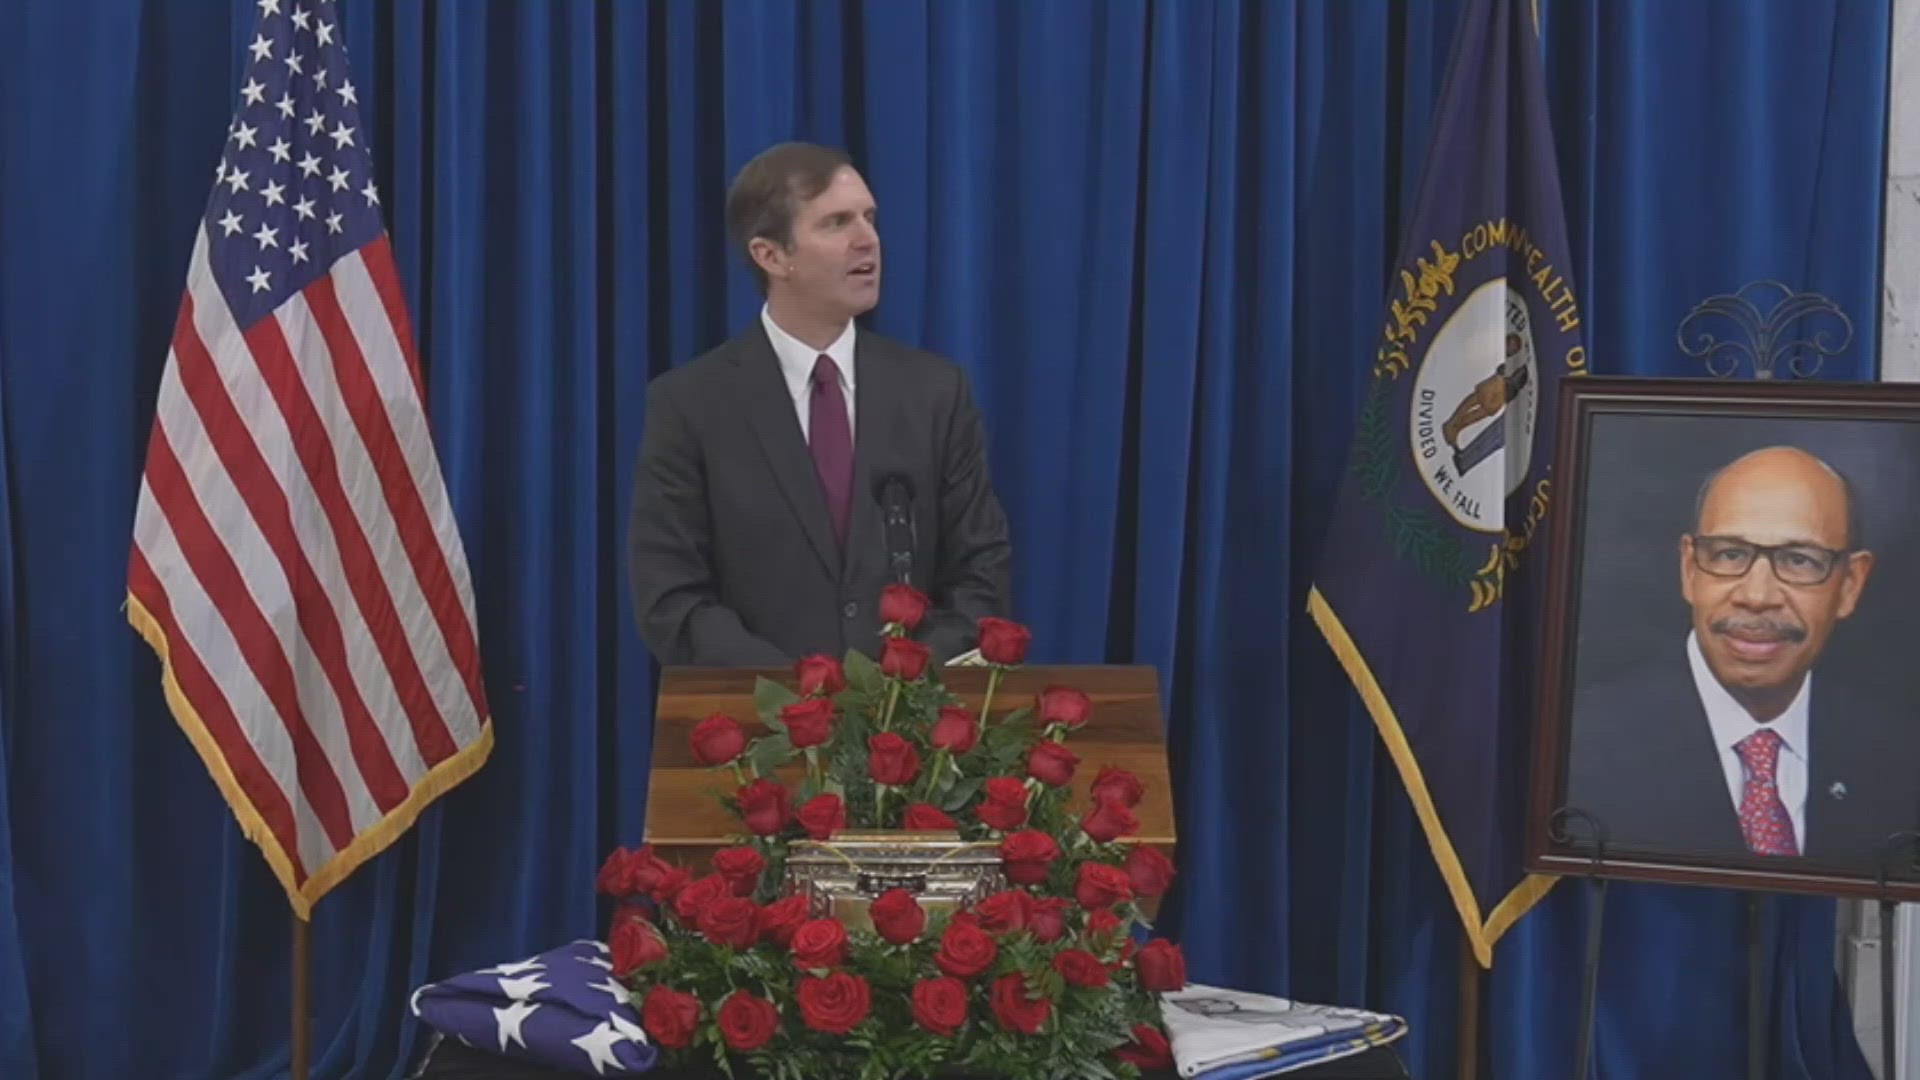 Several state leaders came together to remember the life of Hon. J. Michael Brown who served in Gov. Andy Beshear's administration. Brown passed away at 73.